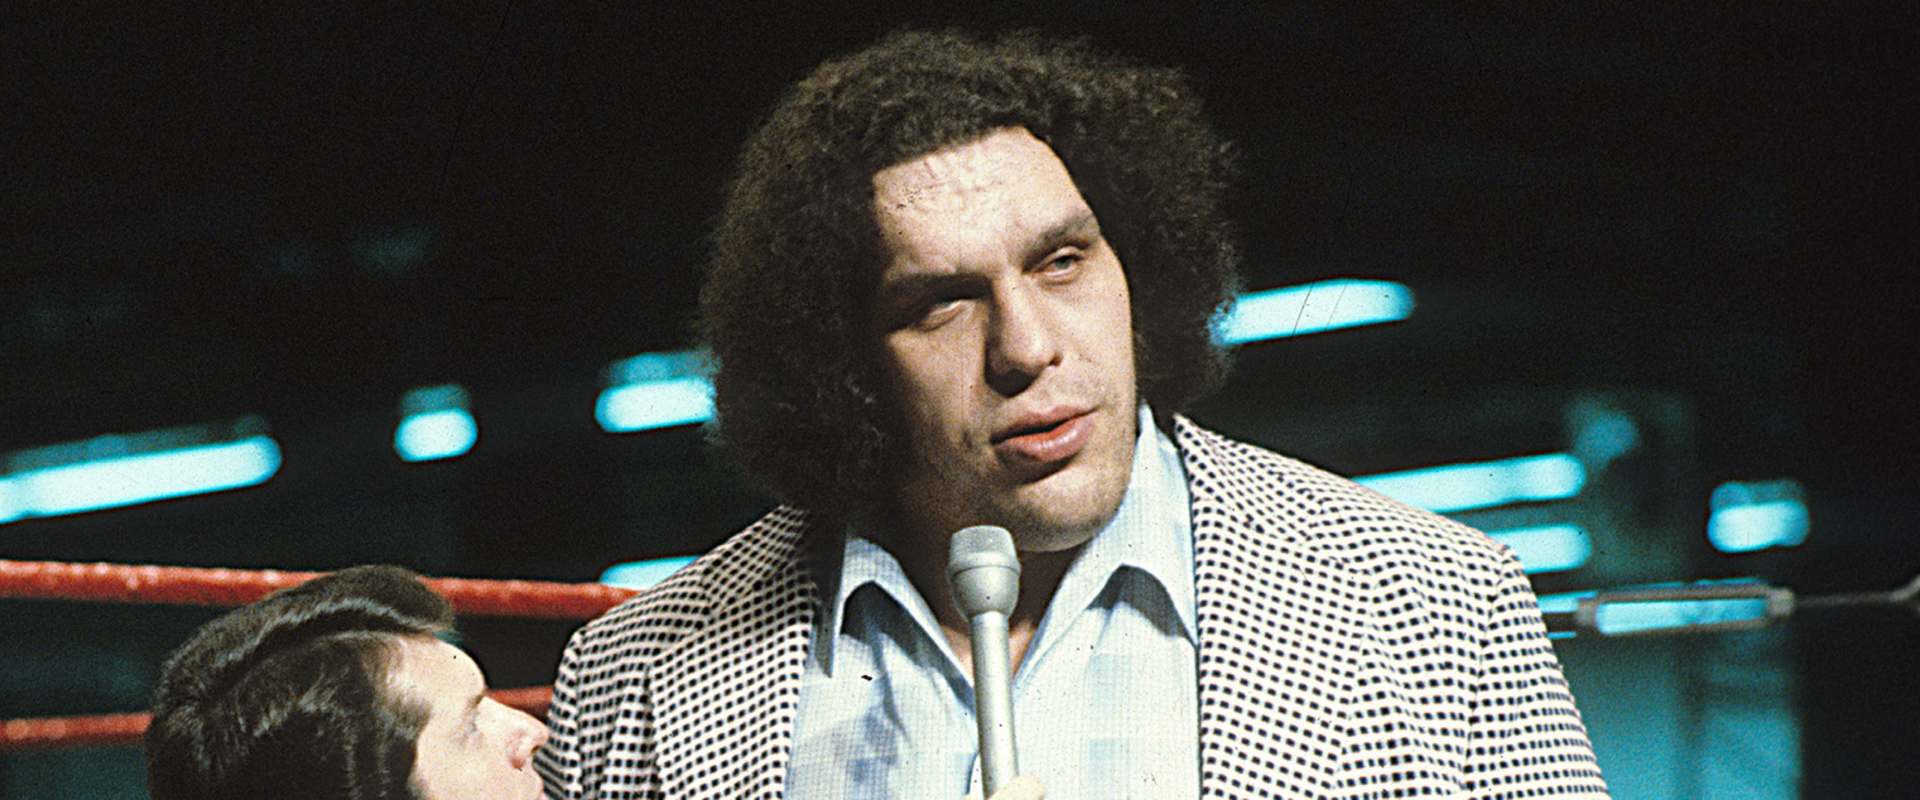 Andre the Giant background 1